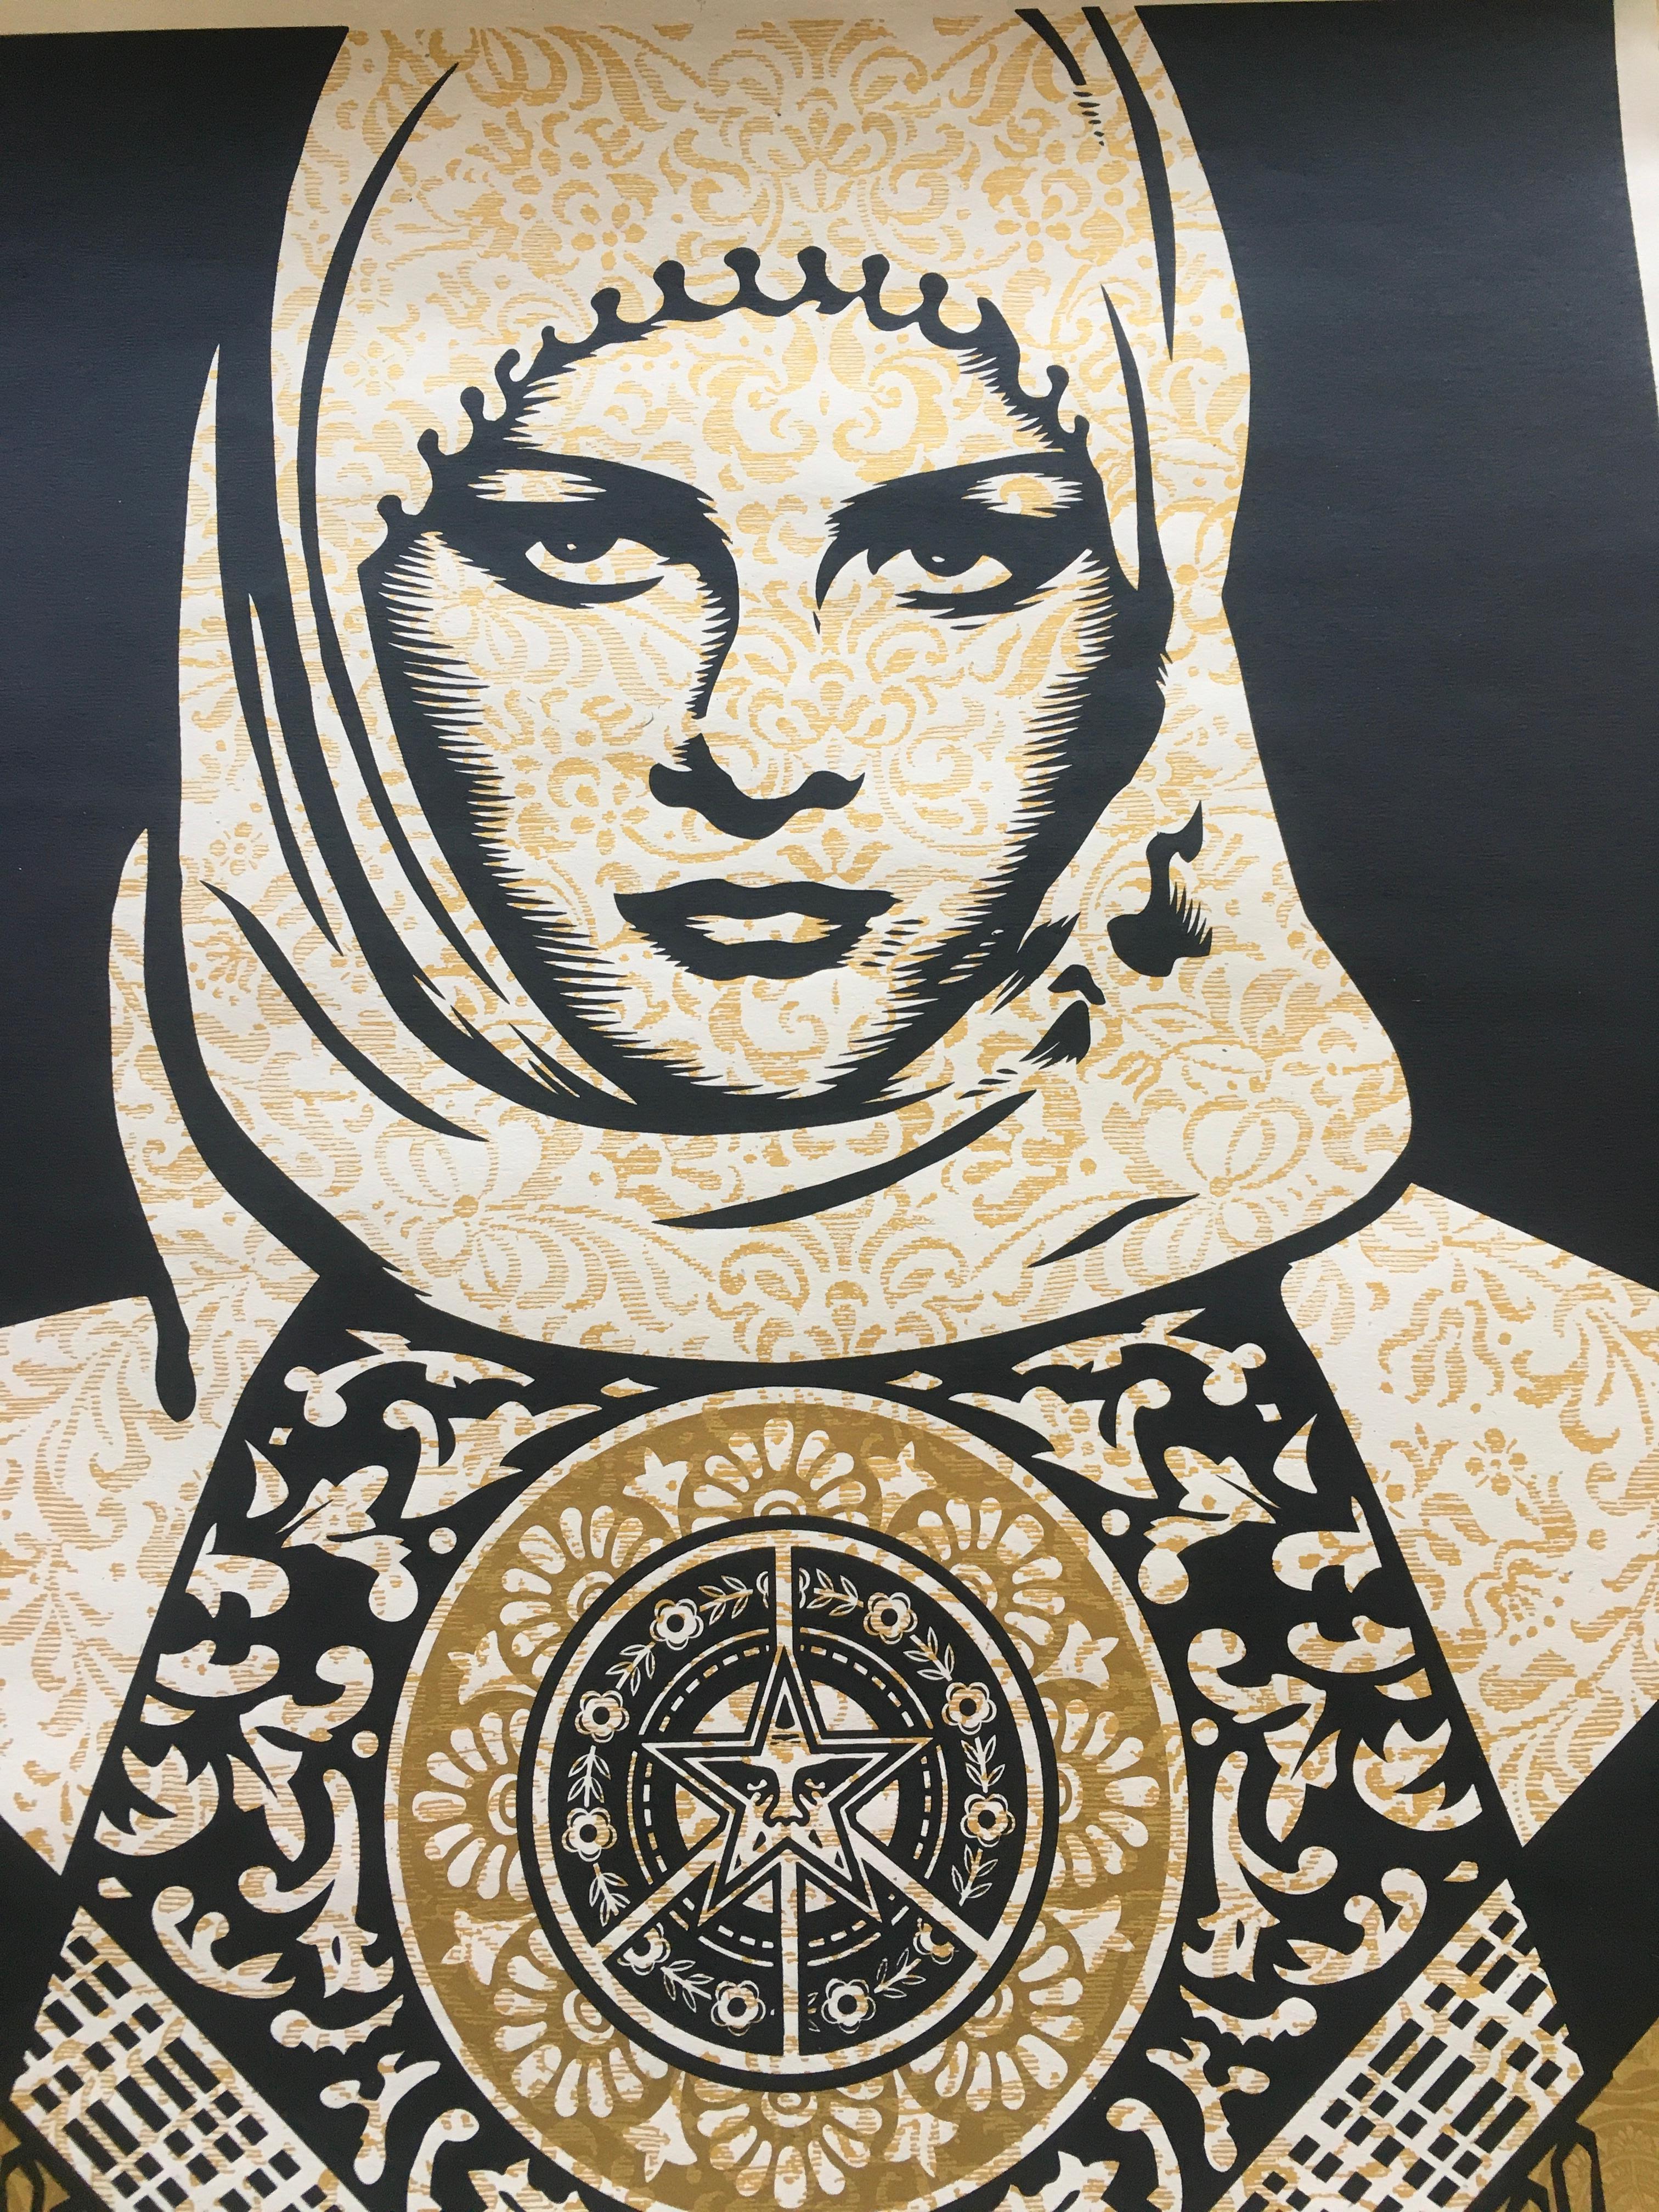 'Arab Woman Gold' by Shepard Fairey, 2007
18 x 24  inches (45 x 61 cm)
Screen Print on  Fine Art Paper.
Limited edition of 300 (AP)
Hand-signed and dated in pencil by Shepard Fairey. Signature and date appear on the bottom right, the number on the